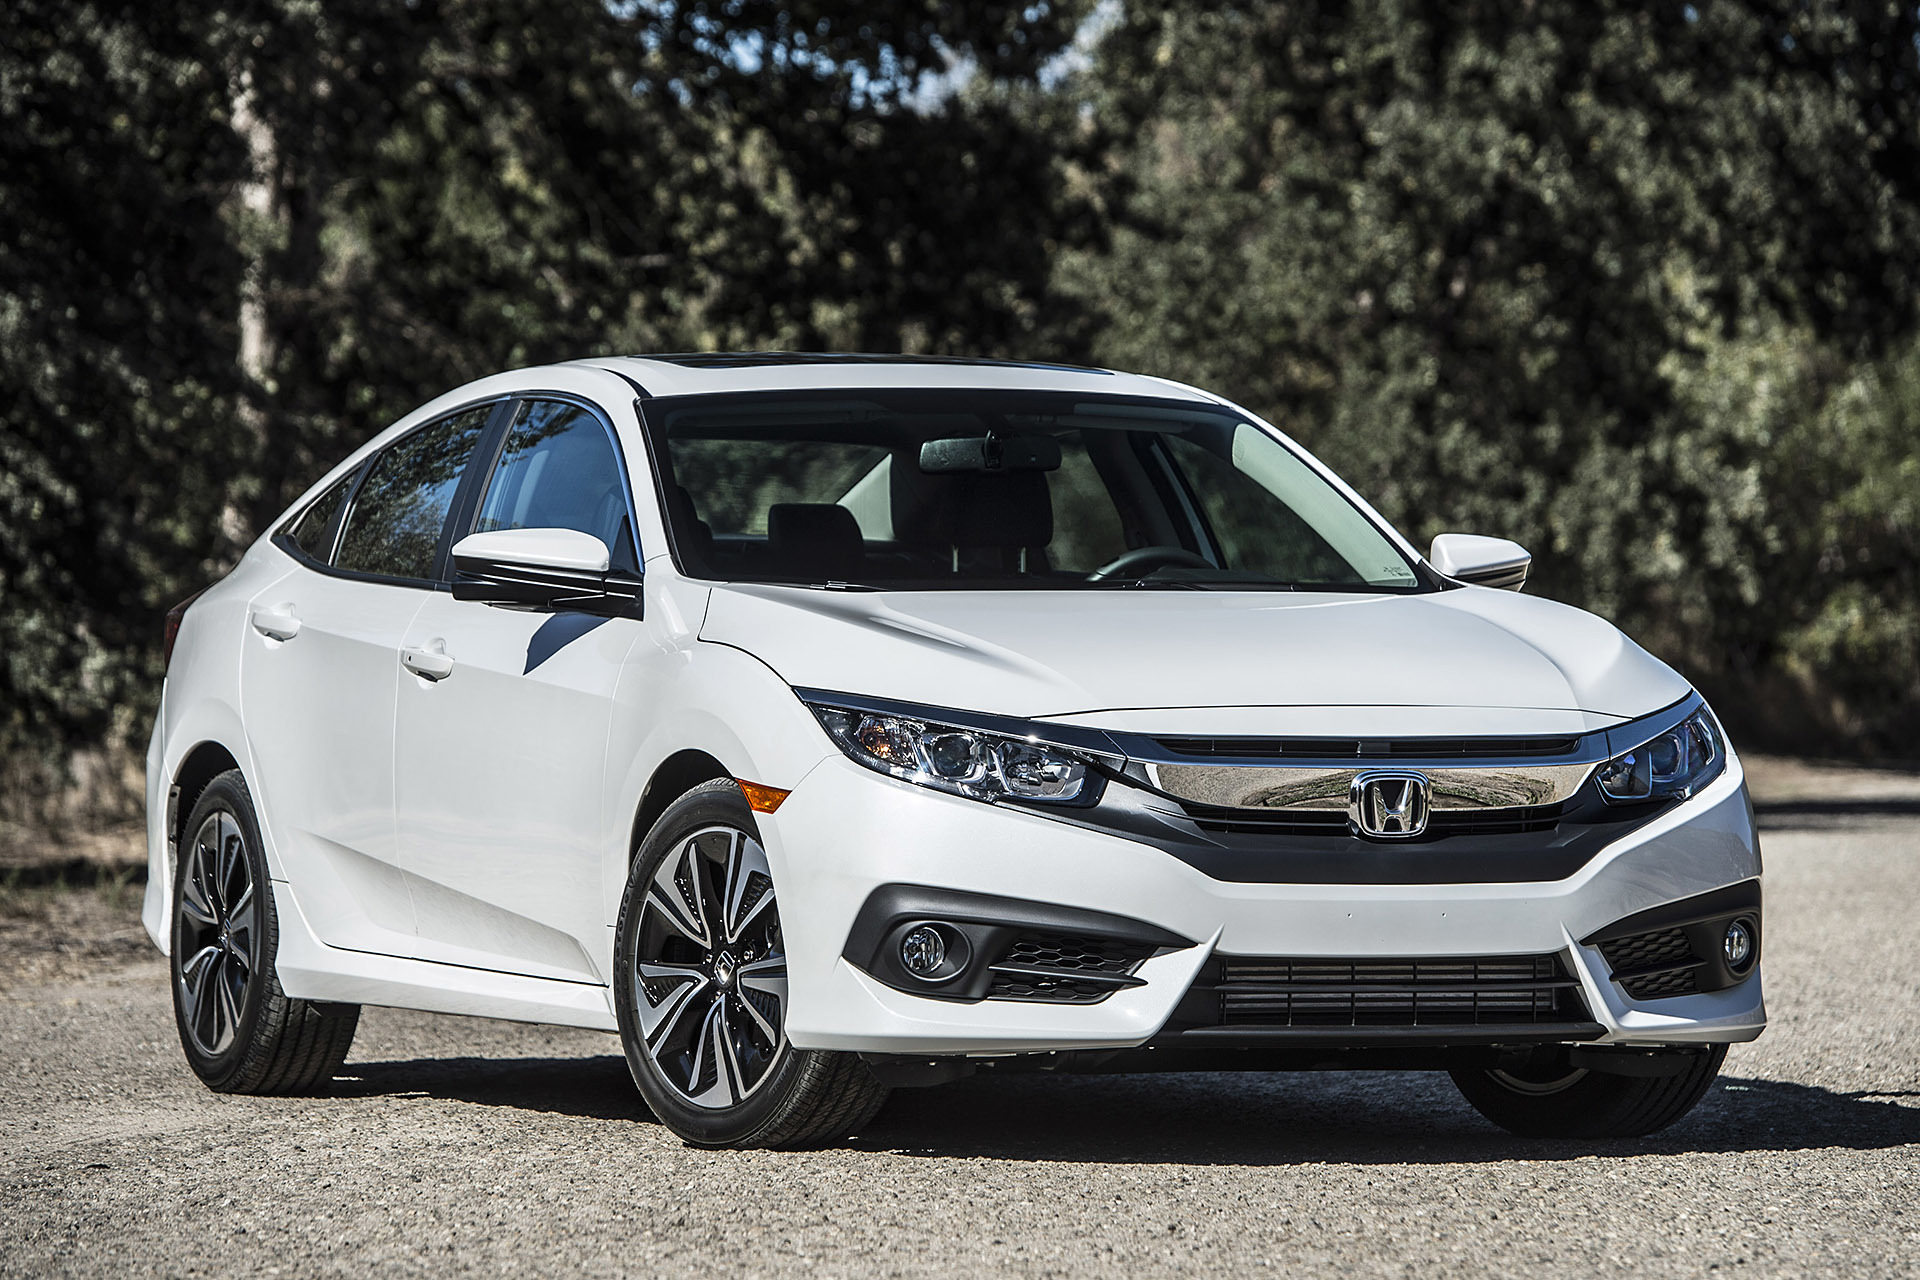 Next Generation Honda Civic Is Here We Will Be Seeing This 2016